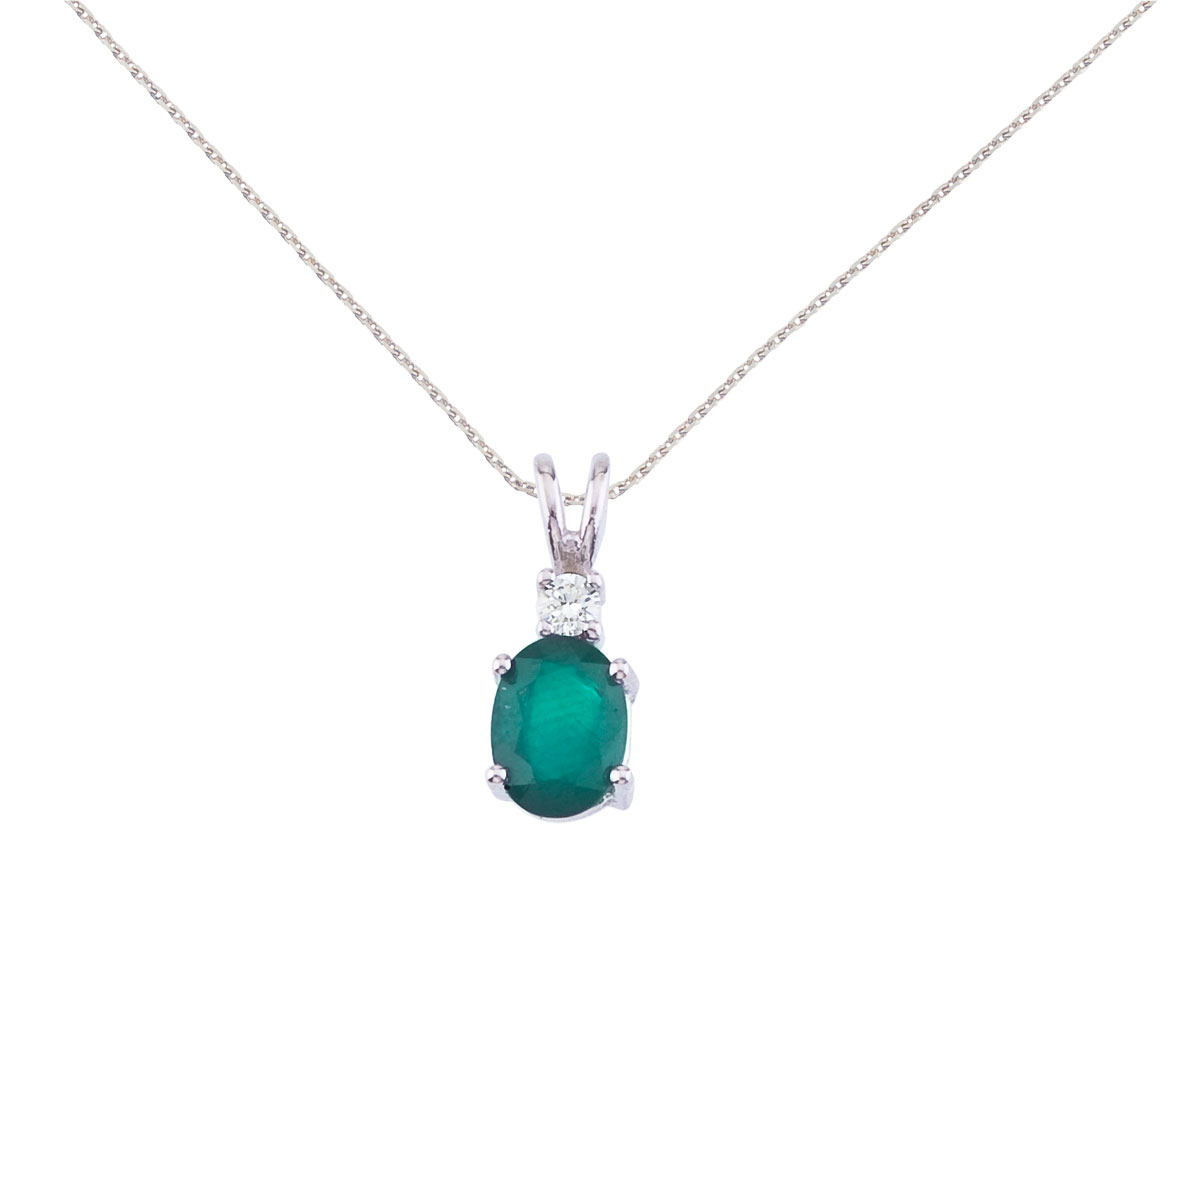 JCX2690: 7x5 mm natural emerald and diamond pendant set in 14k white gold.